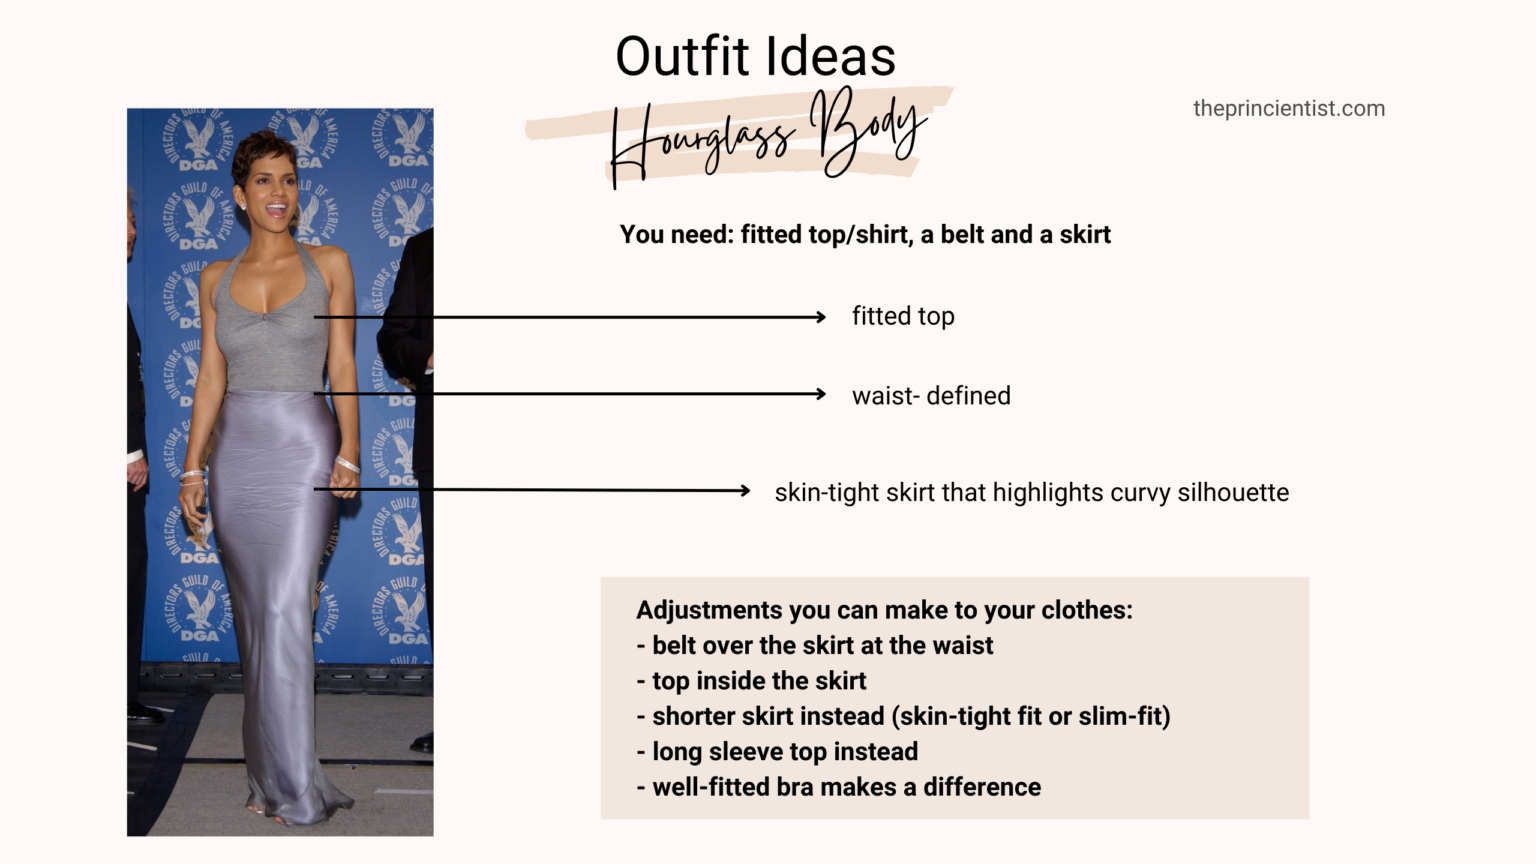 how to dress the hourglass body shape - outfit ideas. you need a fitted top, a skirt and a belt